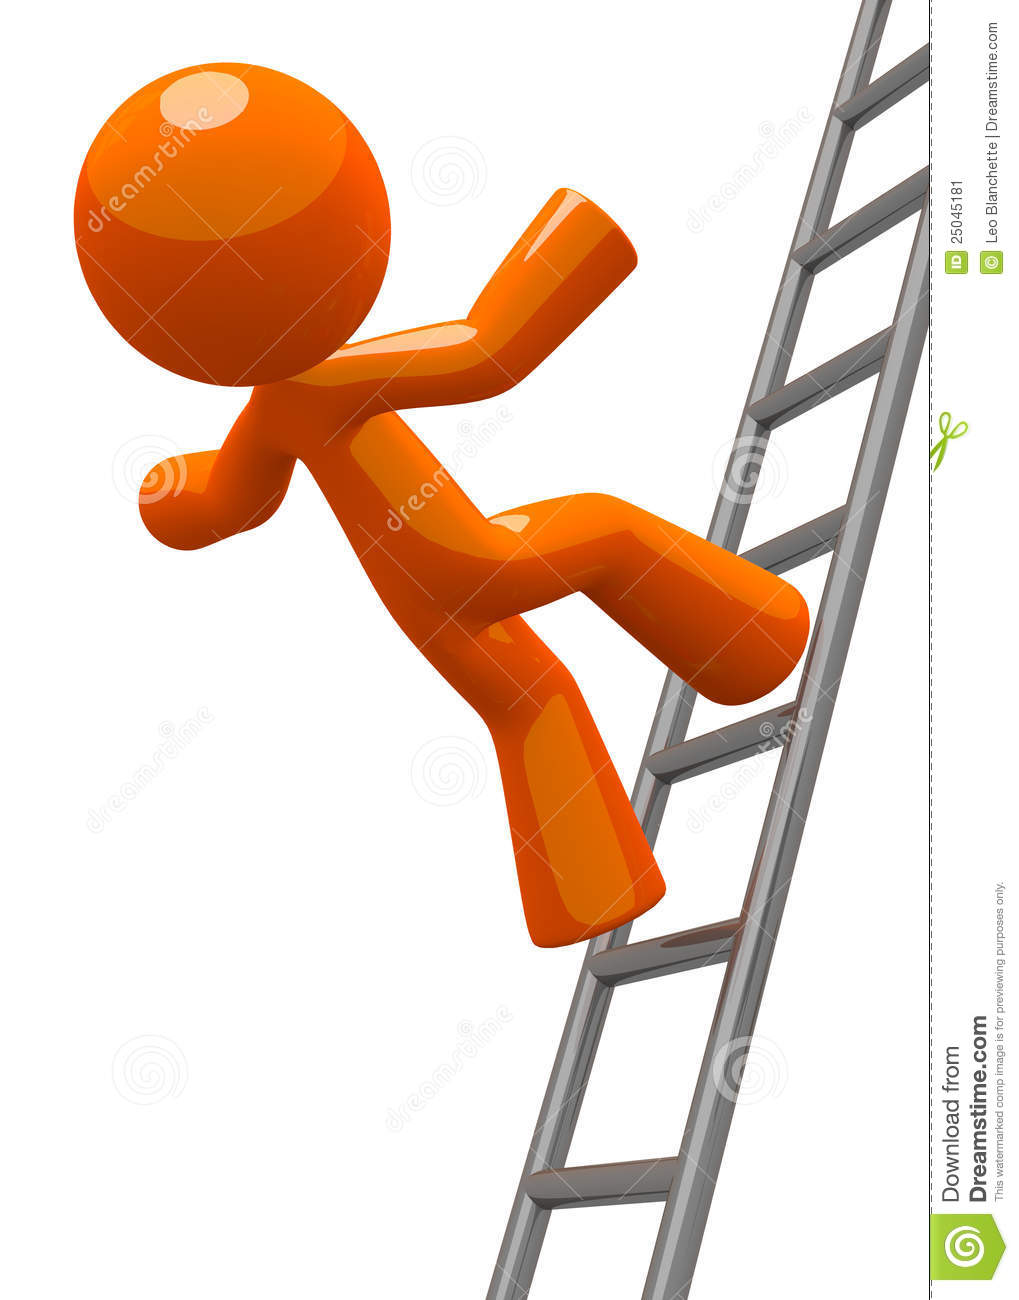 Man Falling From A Ladder  Also Can Be A General Missed Goals Concept